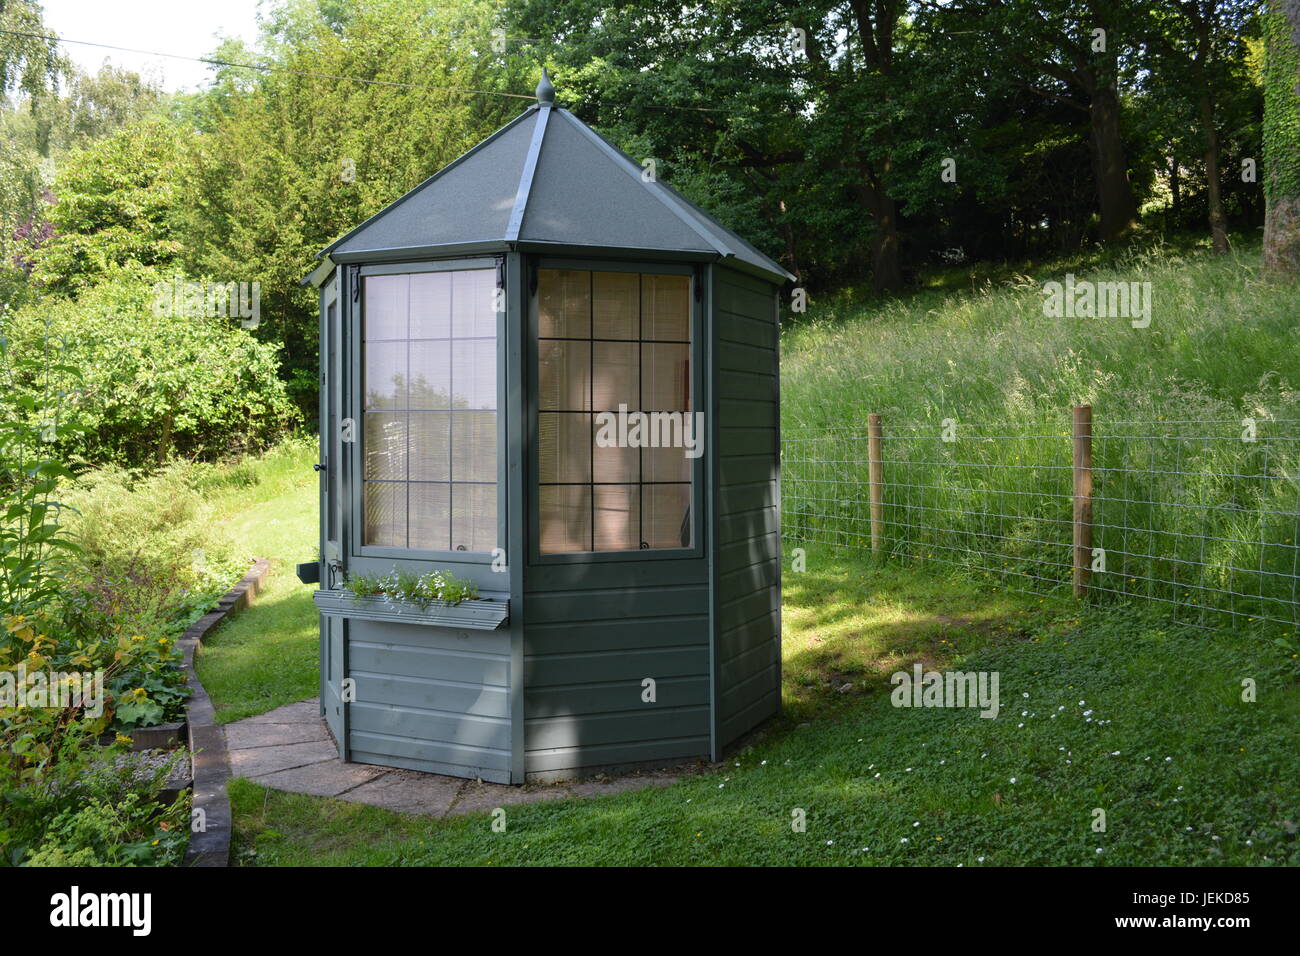 Octagonal painted wooden timber summer house summerhouse in lawned garden setting  with mesh wire stock cattle fence and woodland in background UK Stock Photo